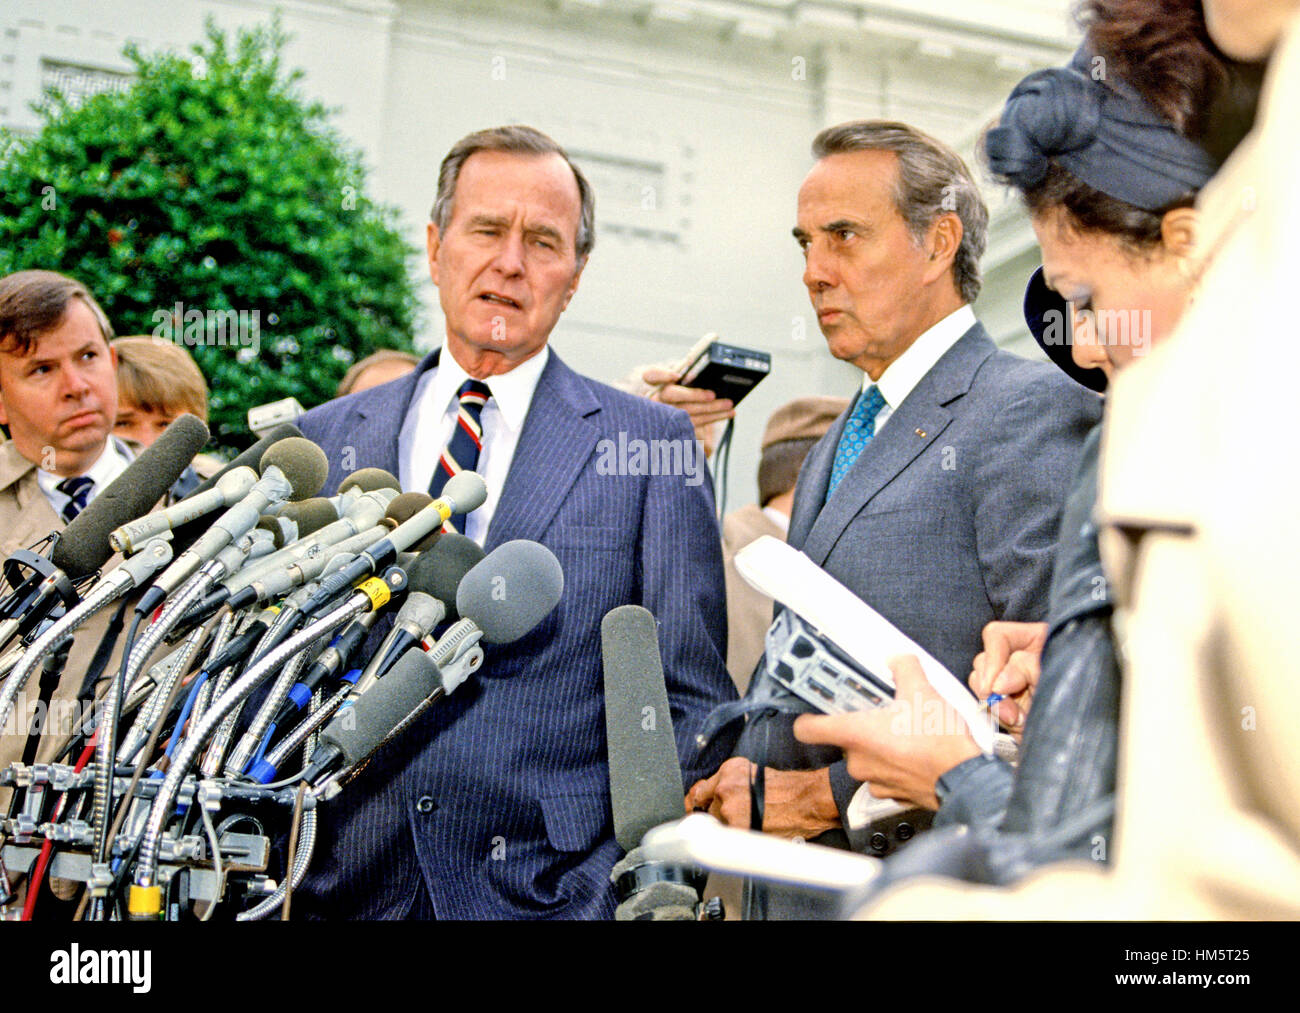 United States President-elect George H.W. Bush and U.S. Senate Republican Leader Bob Dole (Republican of Kansas) meet reporters at the White House in Washington, D.C. following their luncheon meeting on November 28, 1988. Stock Photo